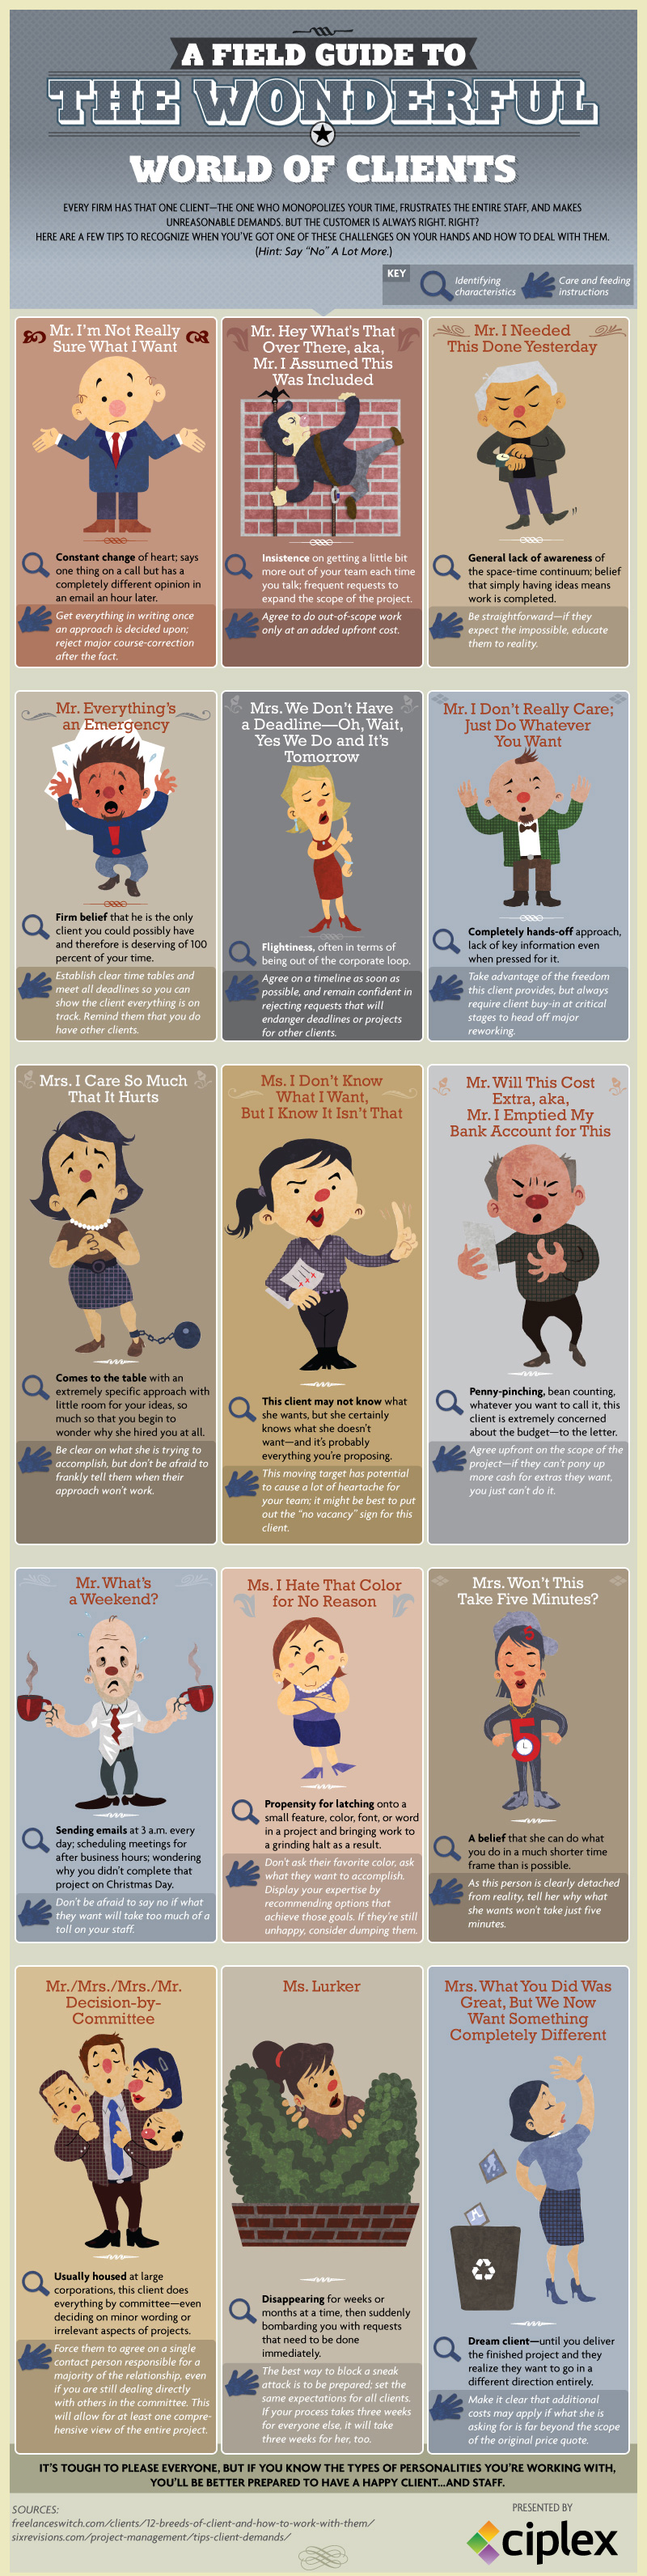 A Field Guide to the Wonderful World of Clients [Infographic]